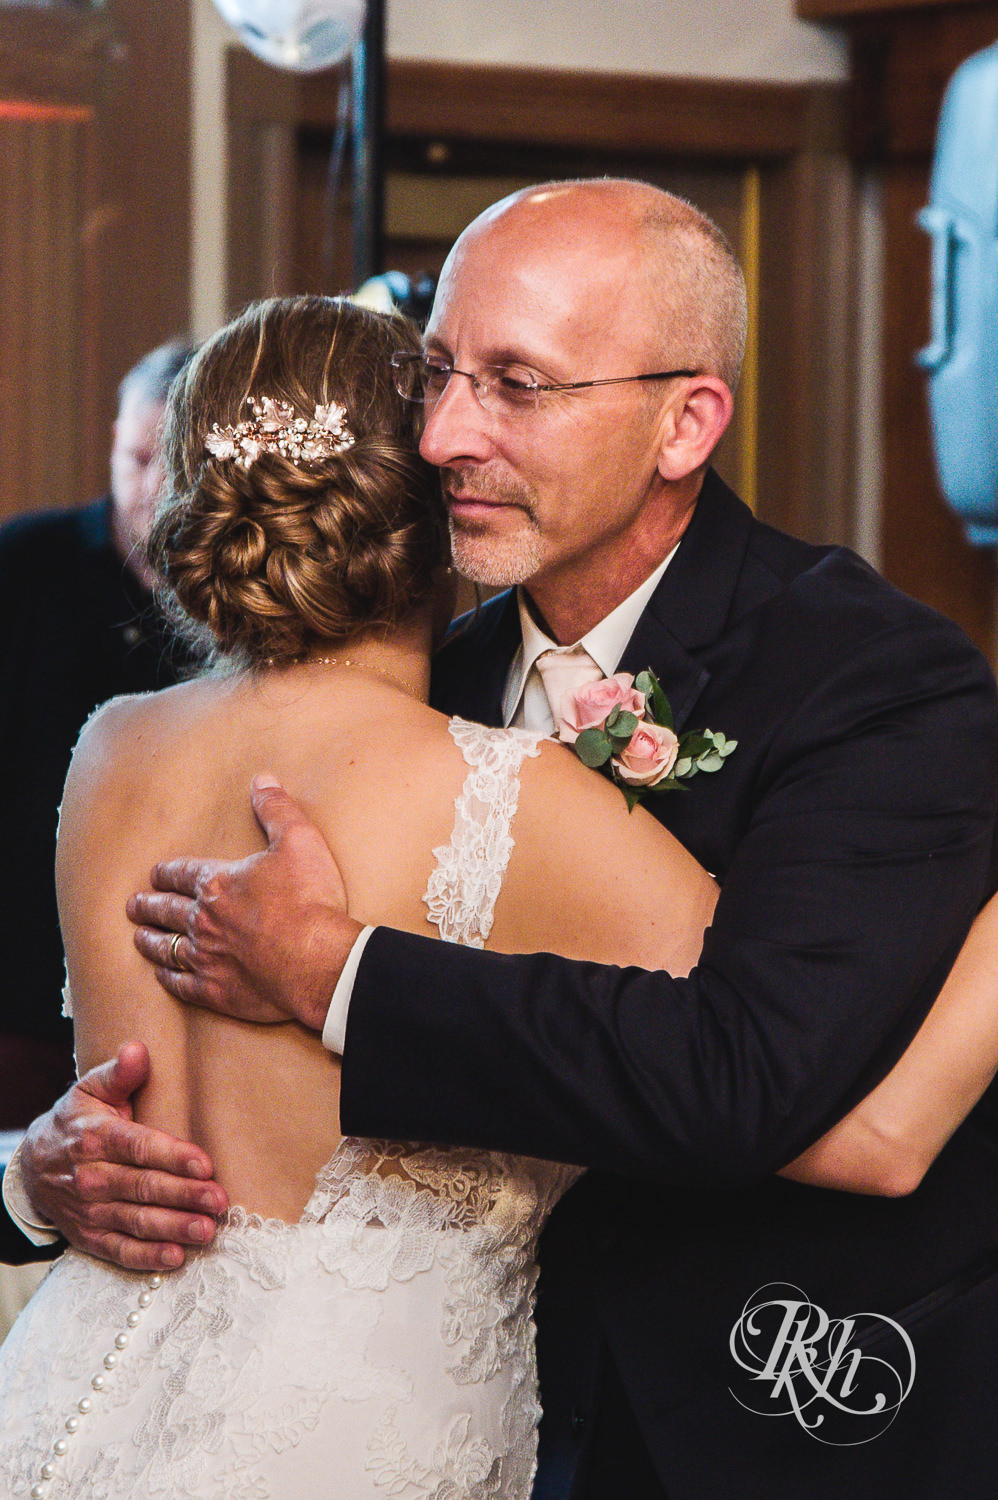 Bride and dad dance at wedding reception at Earle Brown Heritage Center in Brooklyn Center, Minnesota.